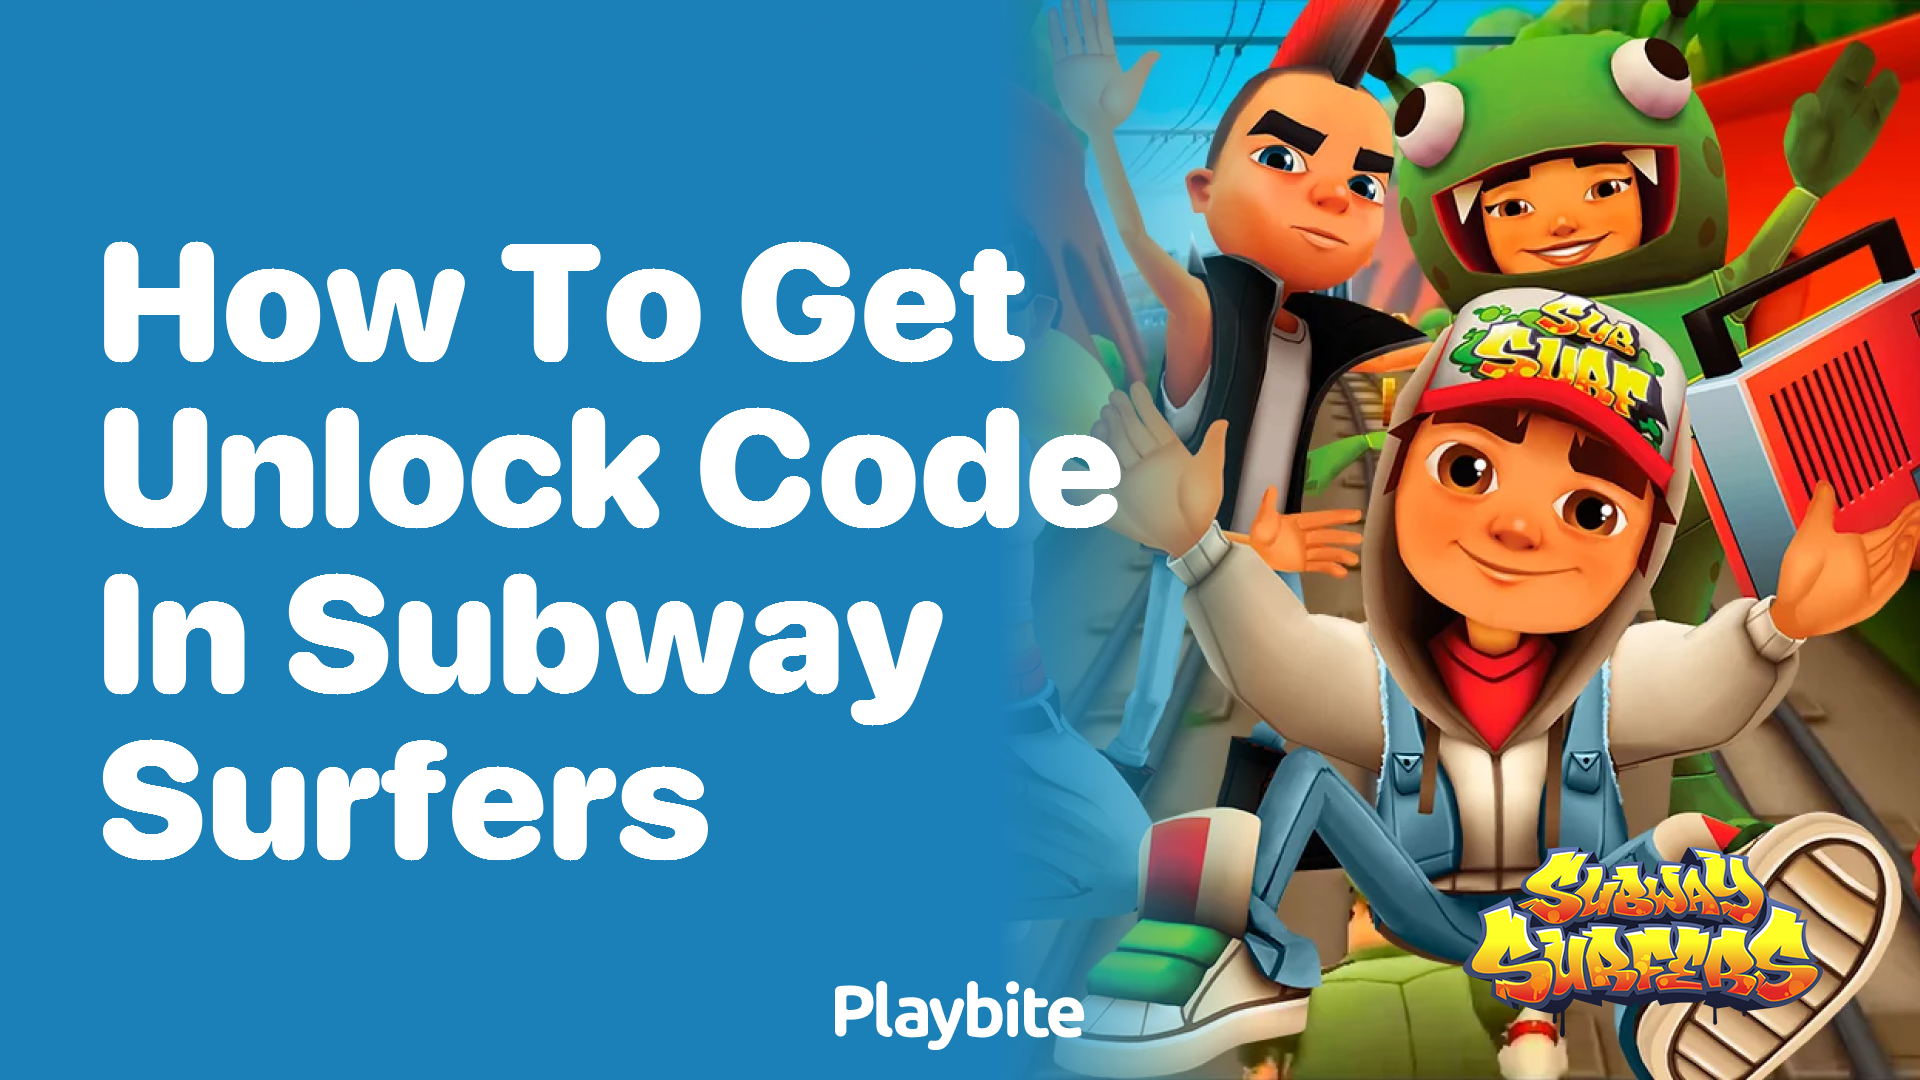 How to get an unlock code in Subway Surfers?